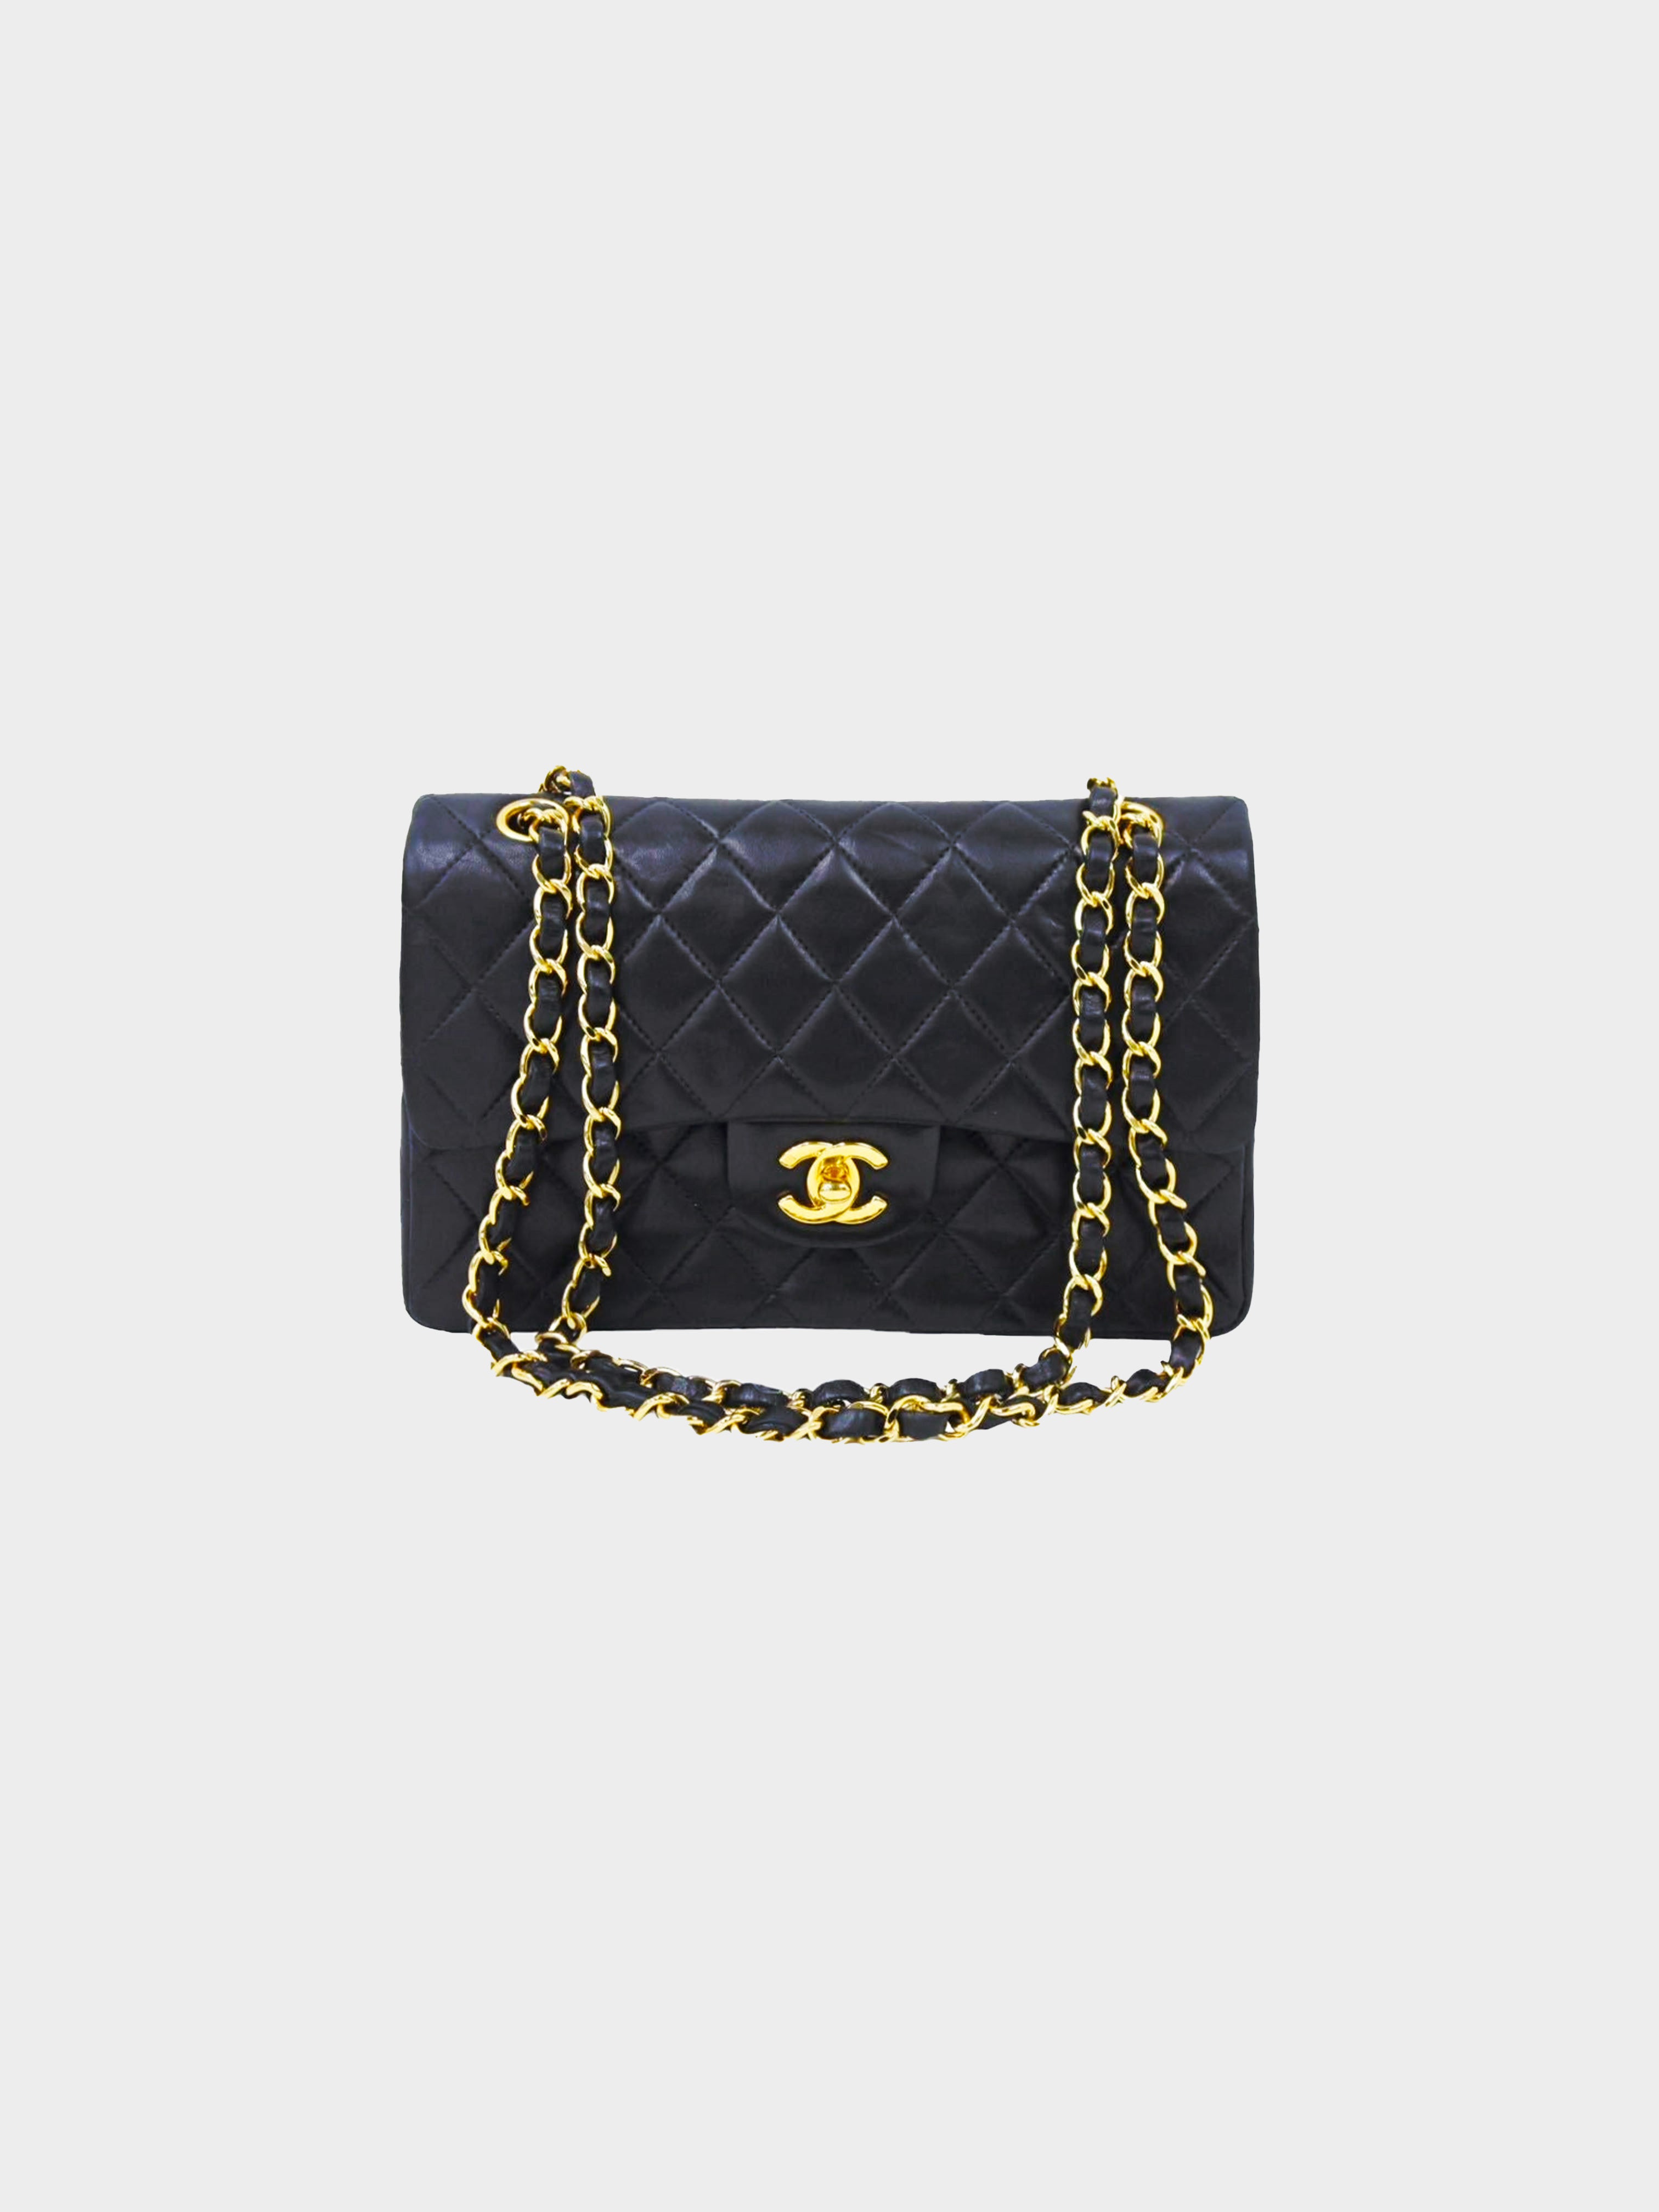 vintage chanel bags 2000